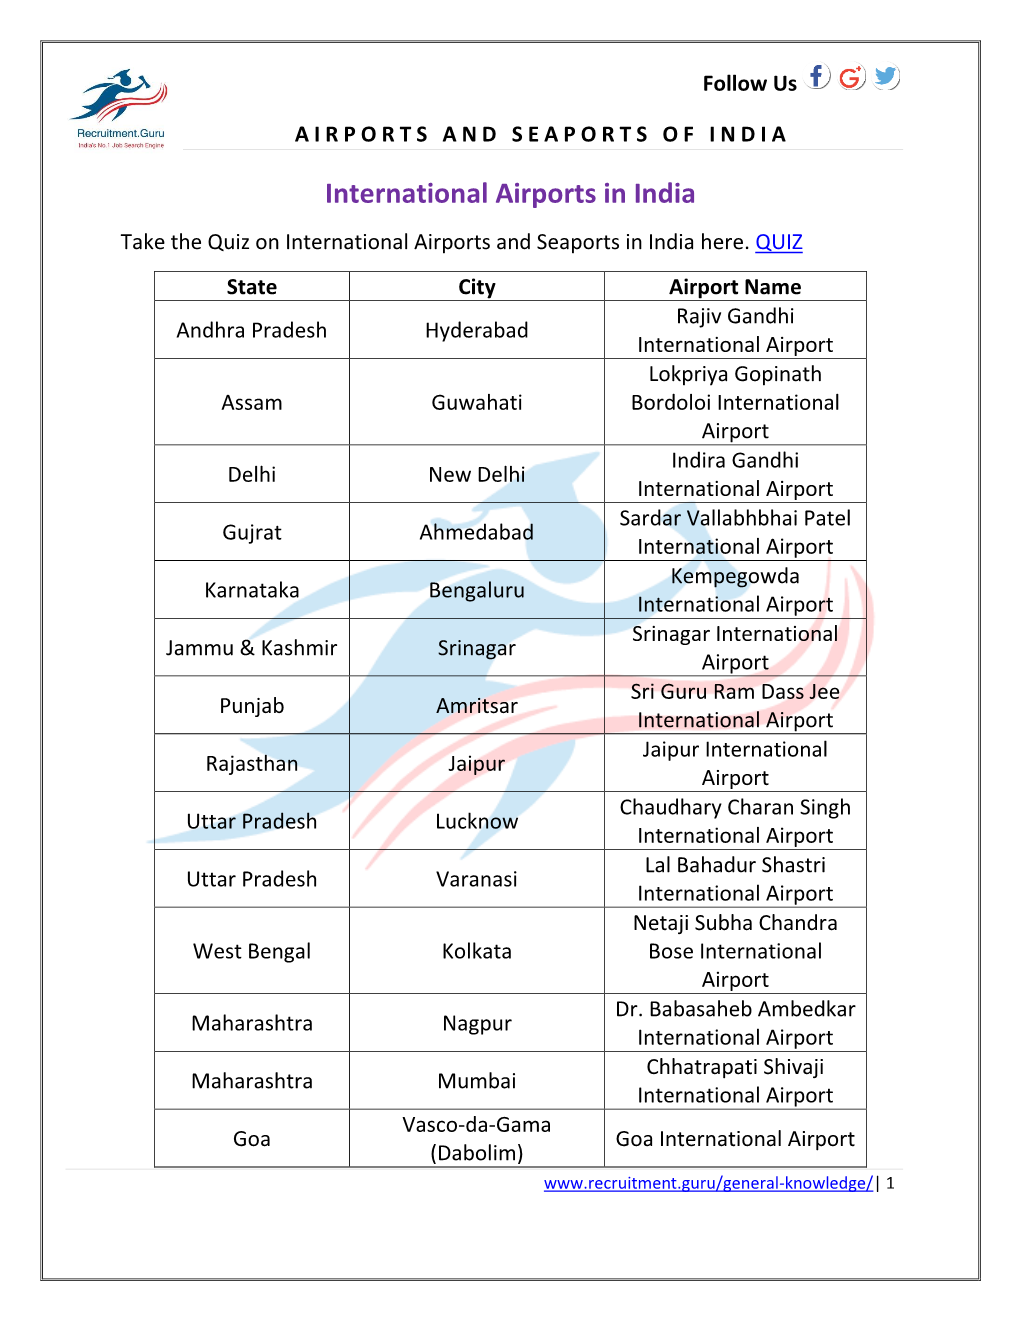 International Airports in India Take the Quiz on International Airports and Seaports in India Here